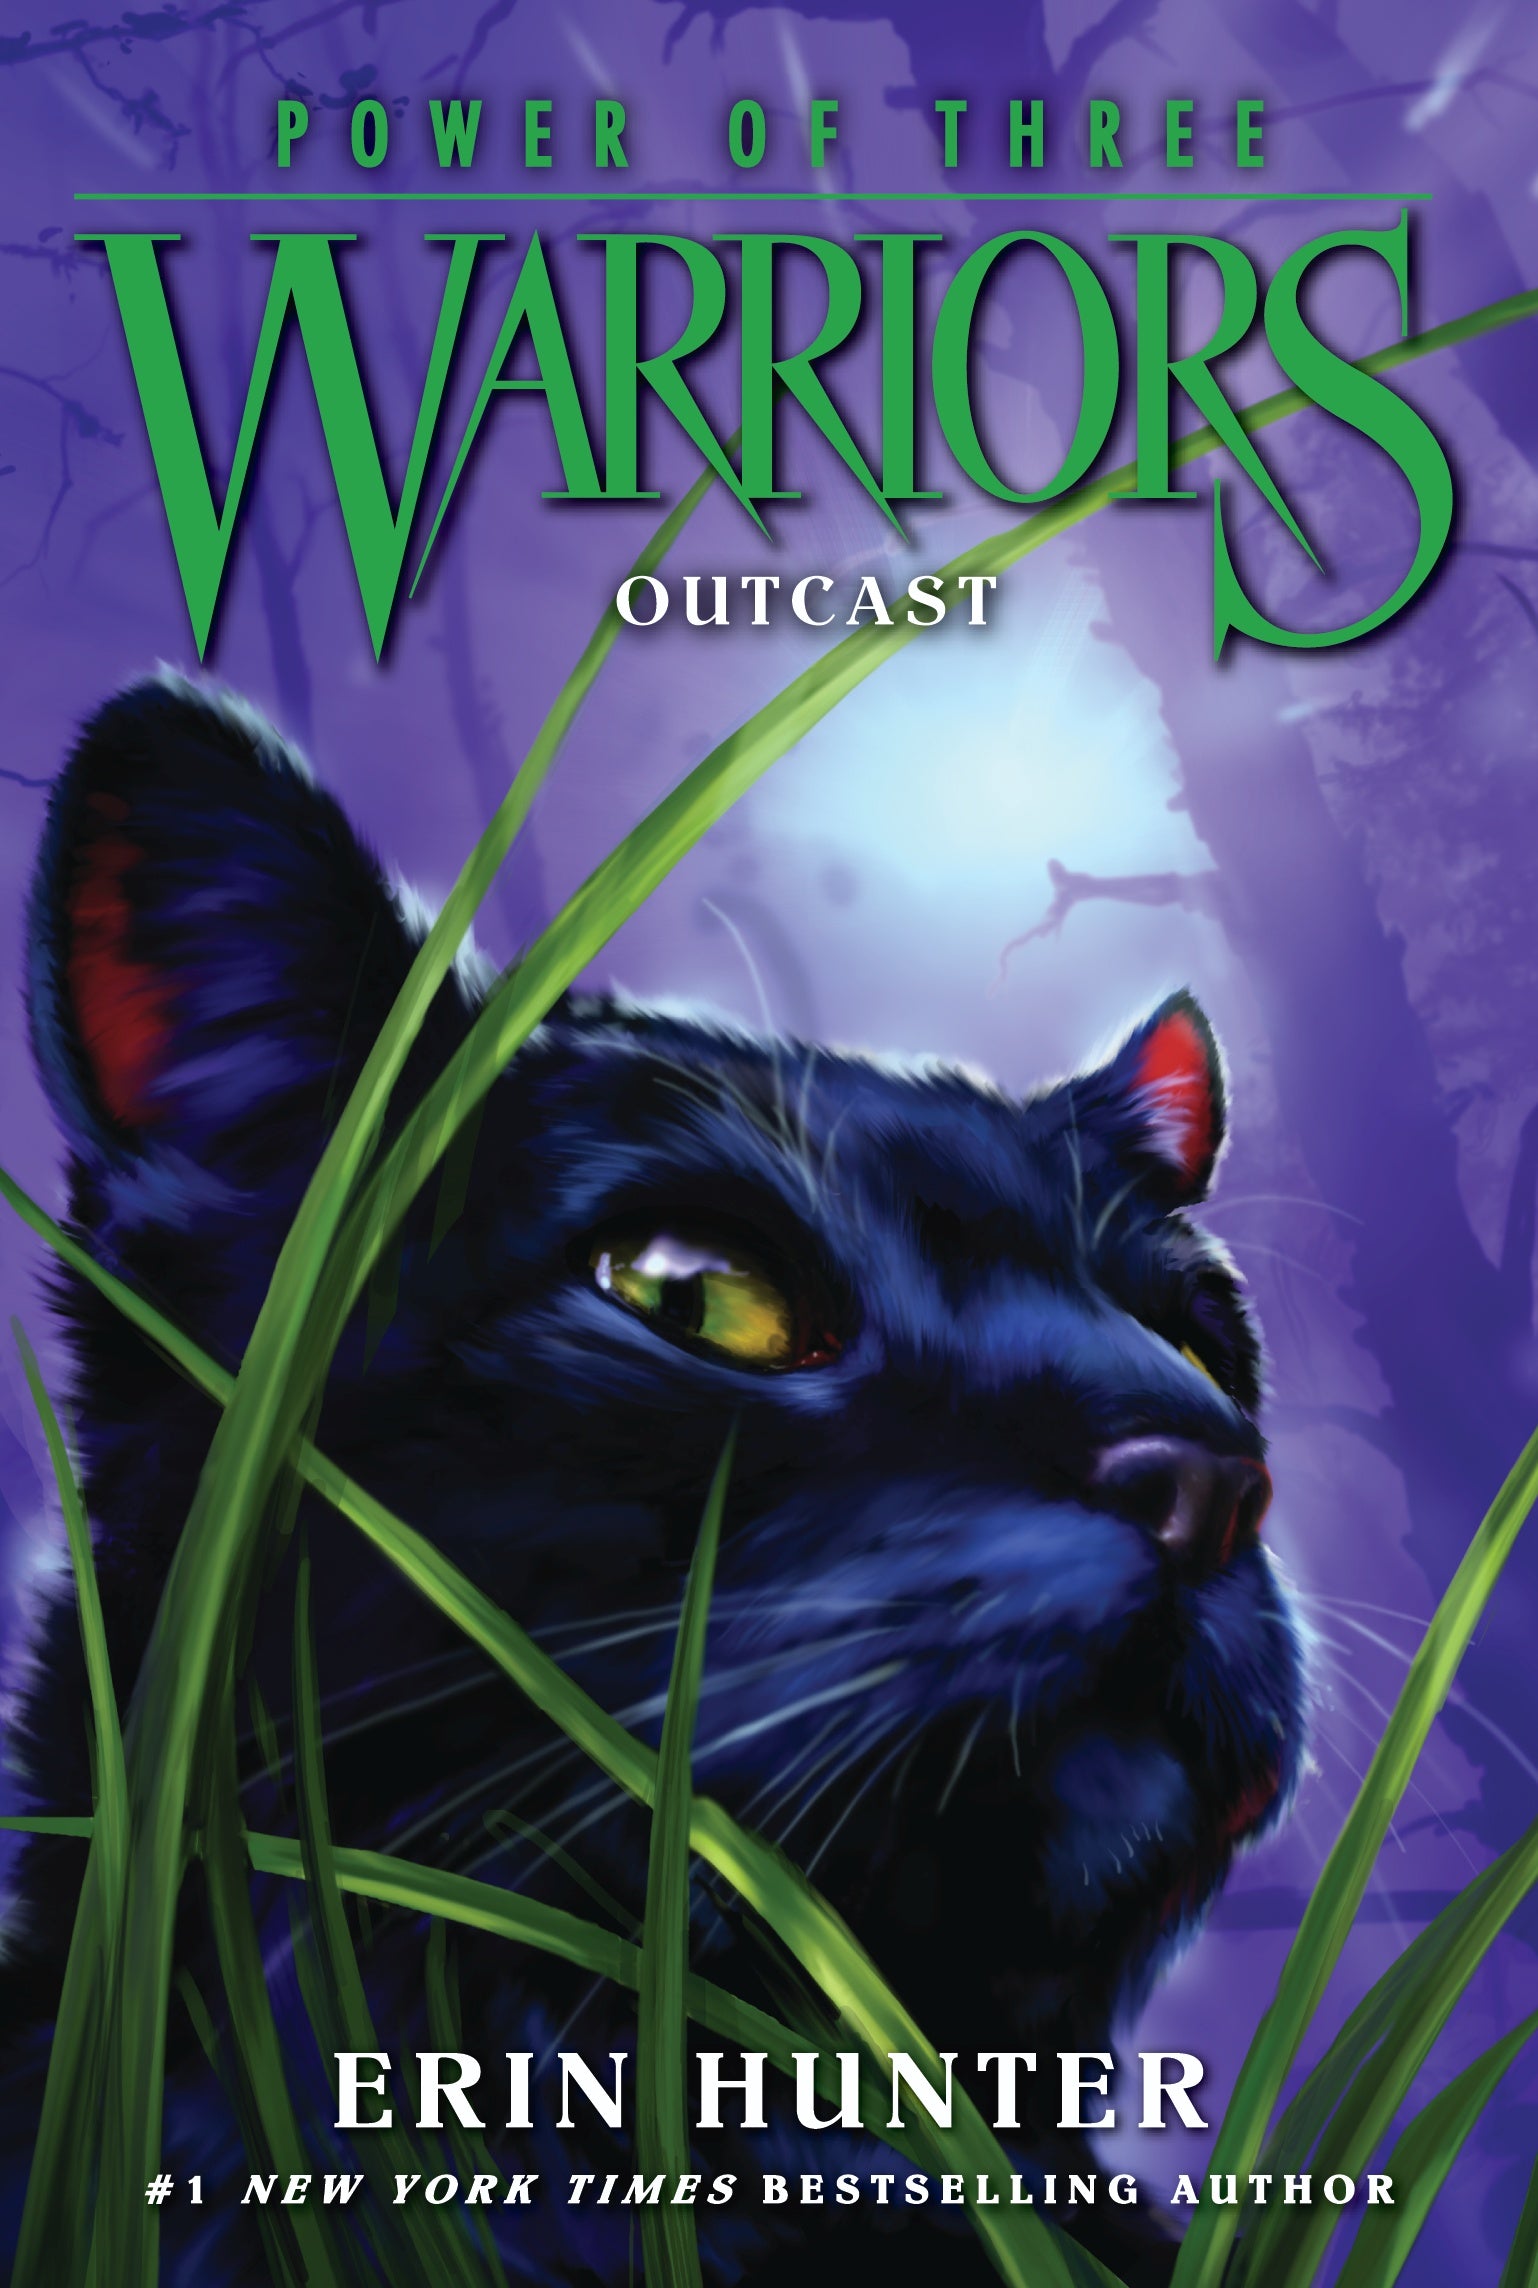 River (Warriors: A Starless Clan #1)|Paperback